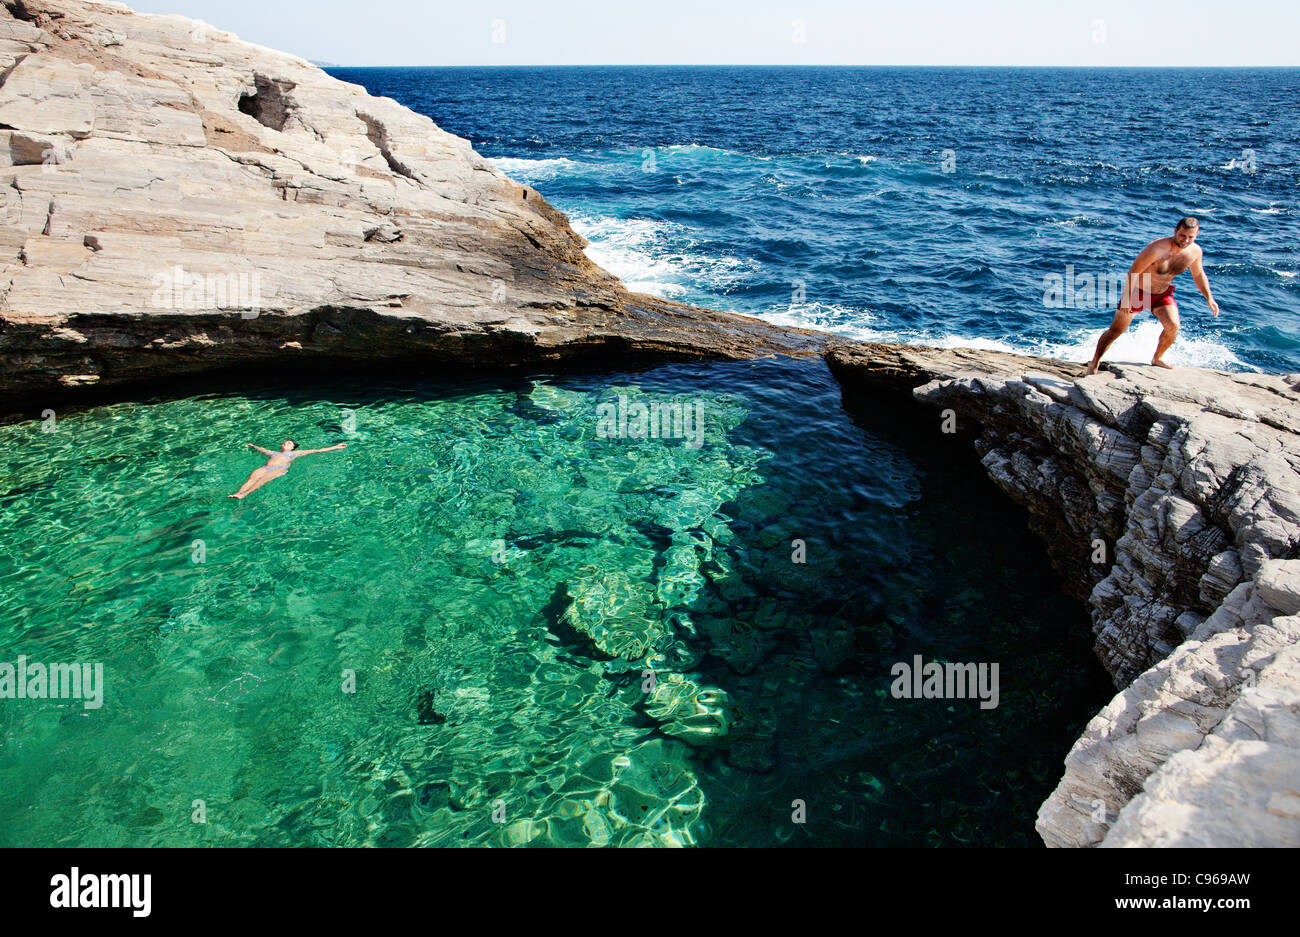 Natural swimming pool called Giola in Thassos island, Greece. Stock Photo